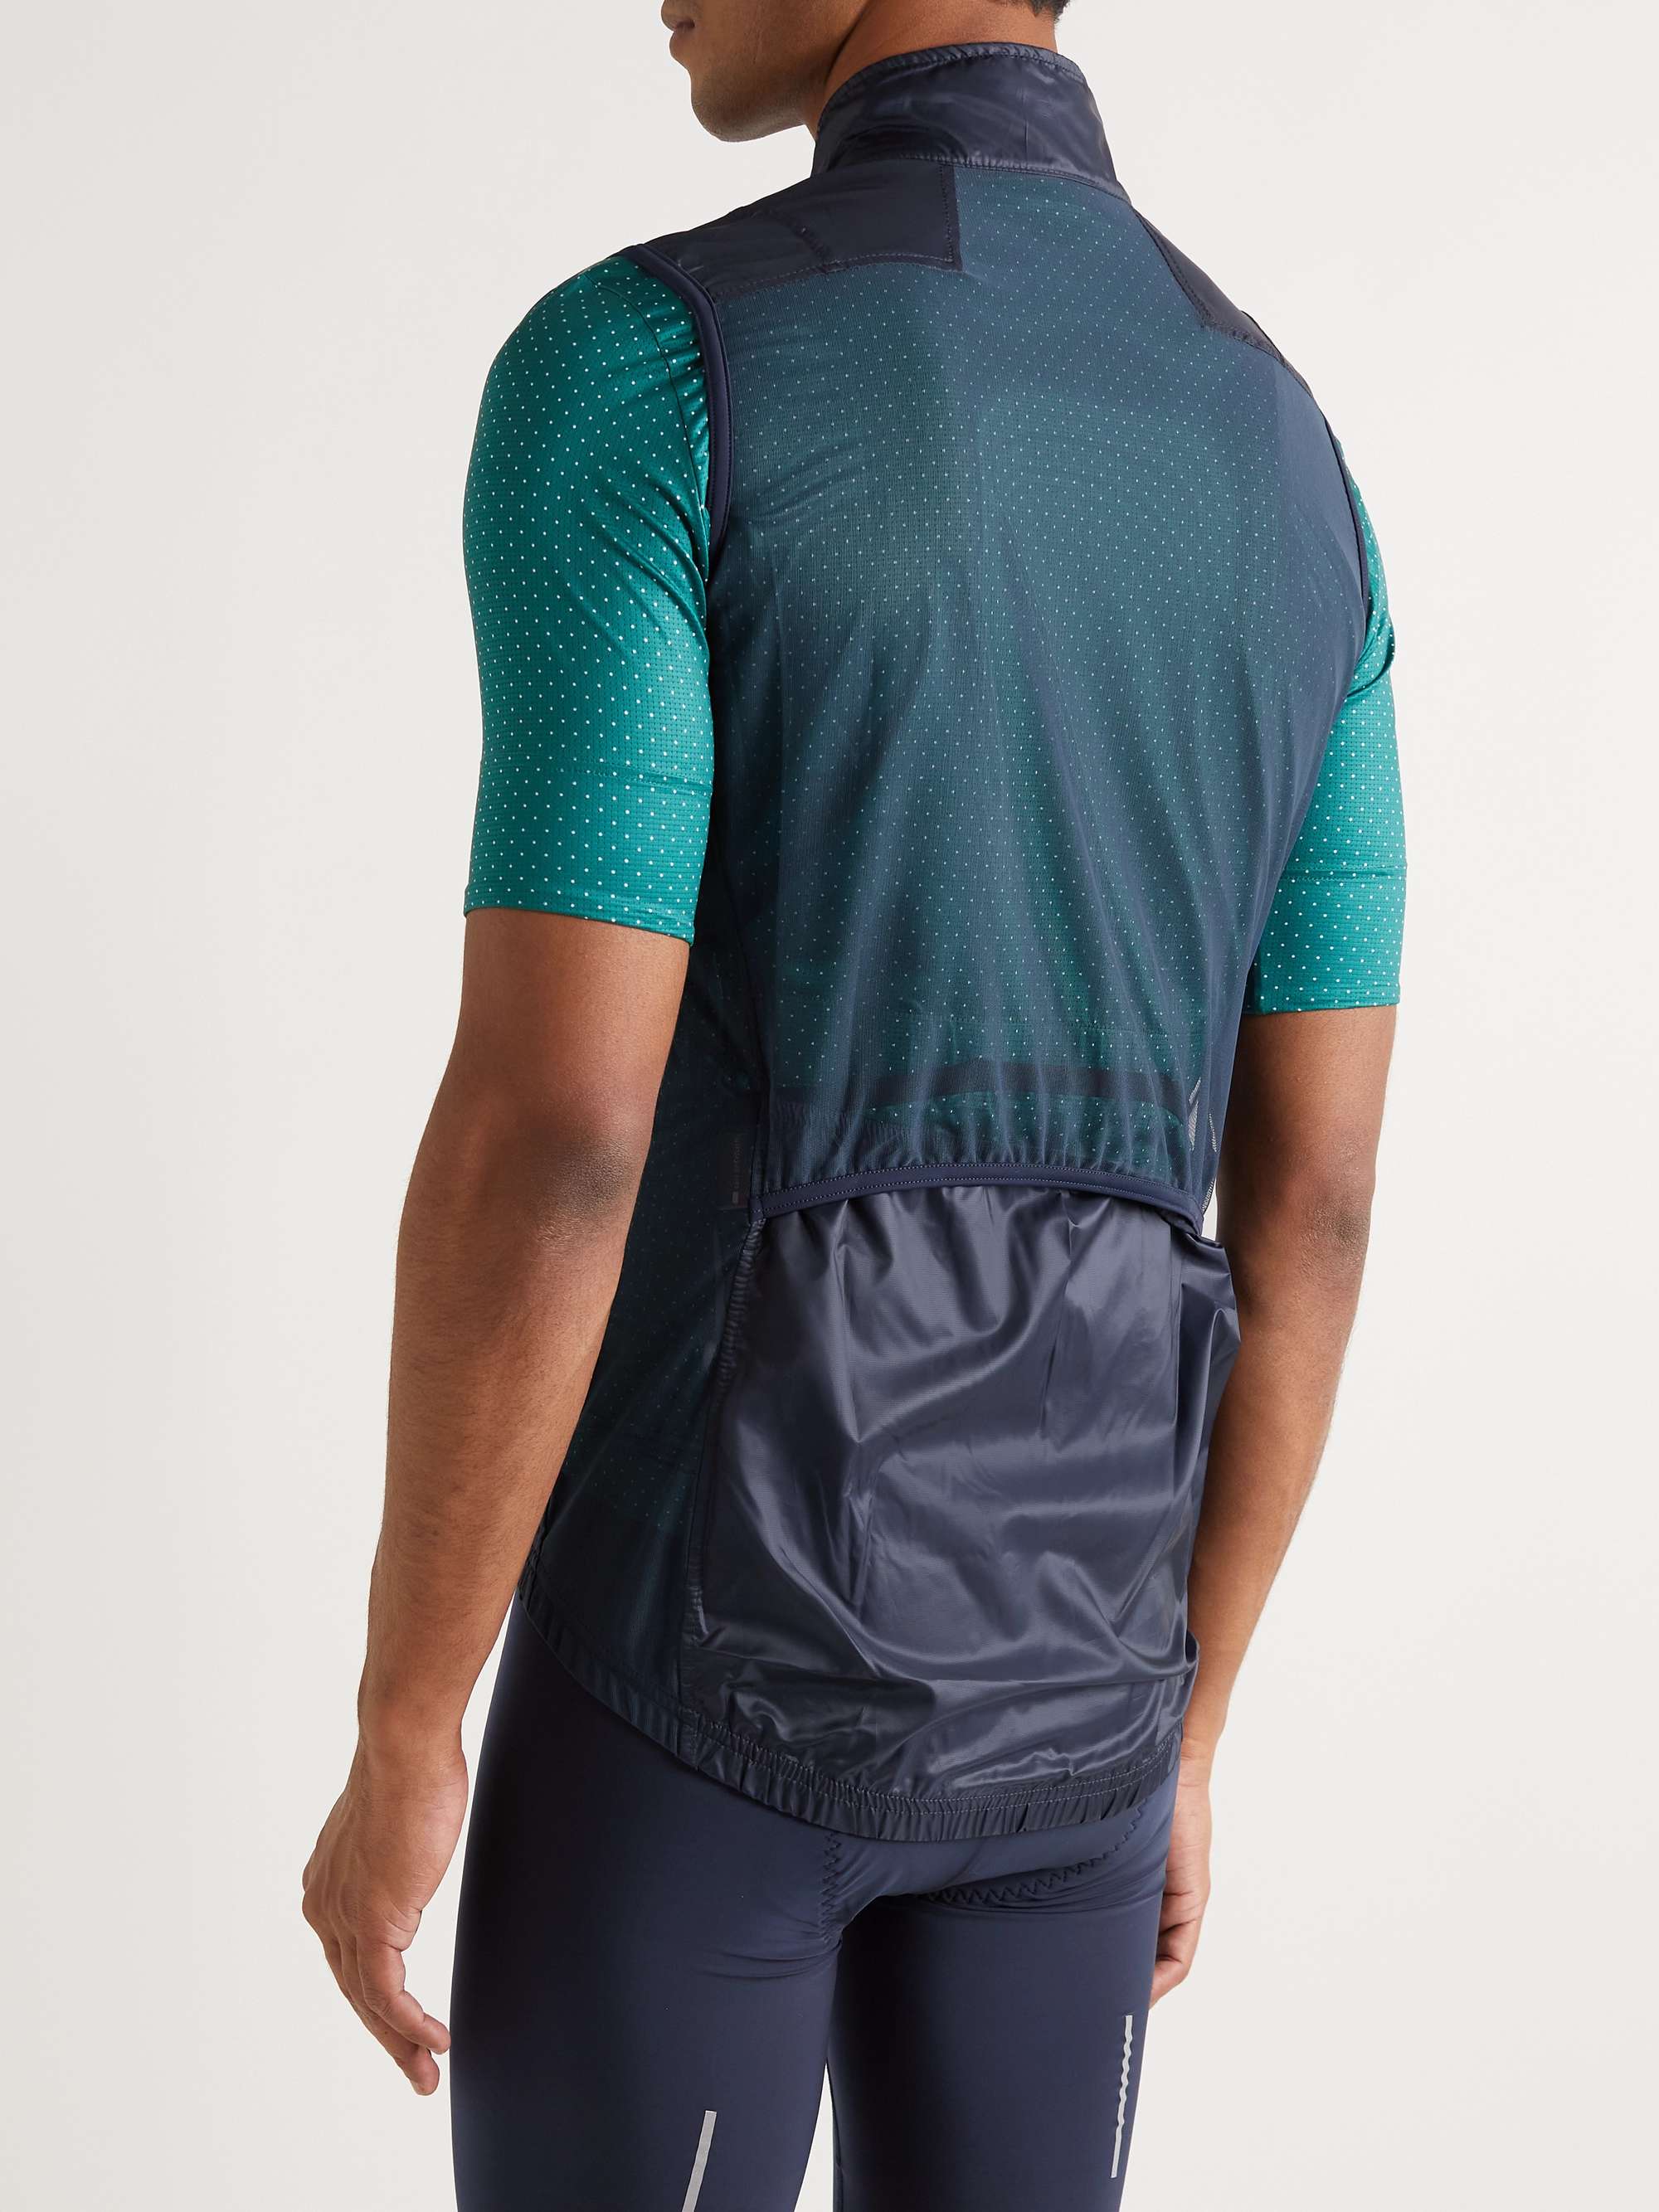 CAFE DU CYCLISTE Petra Shell and Mesh Cycling Gilet